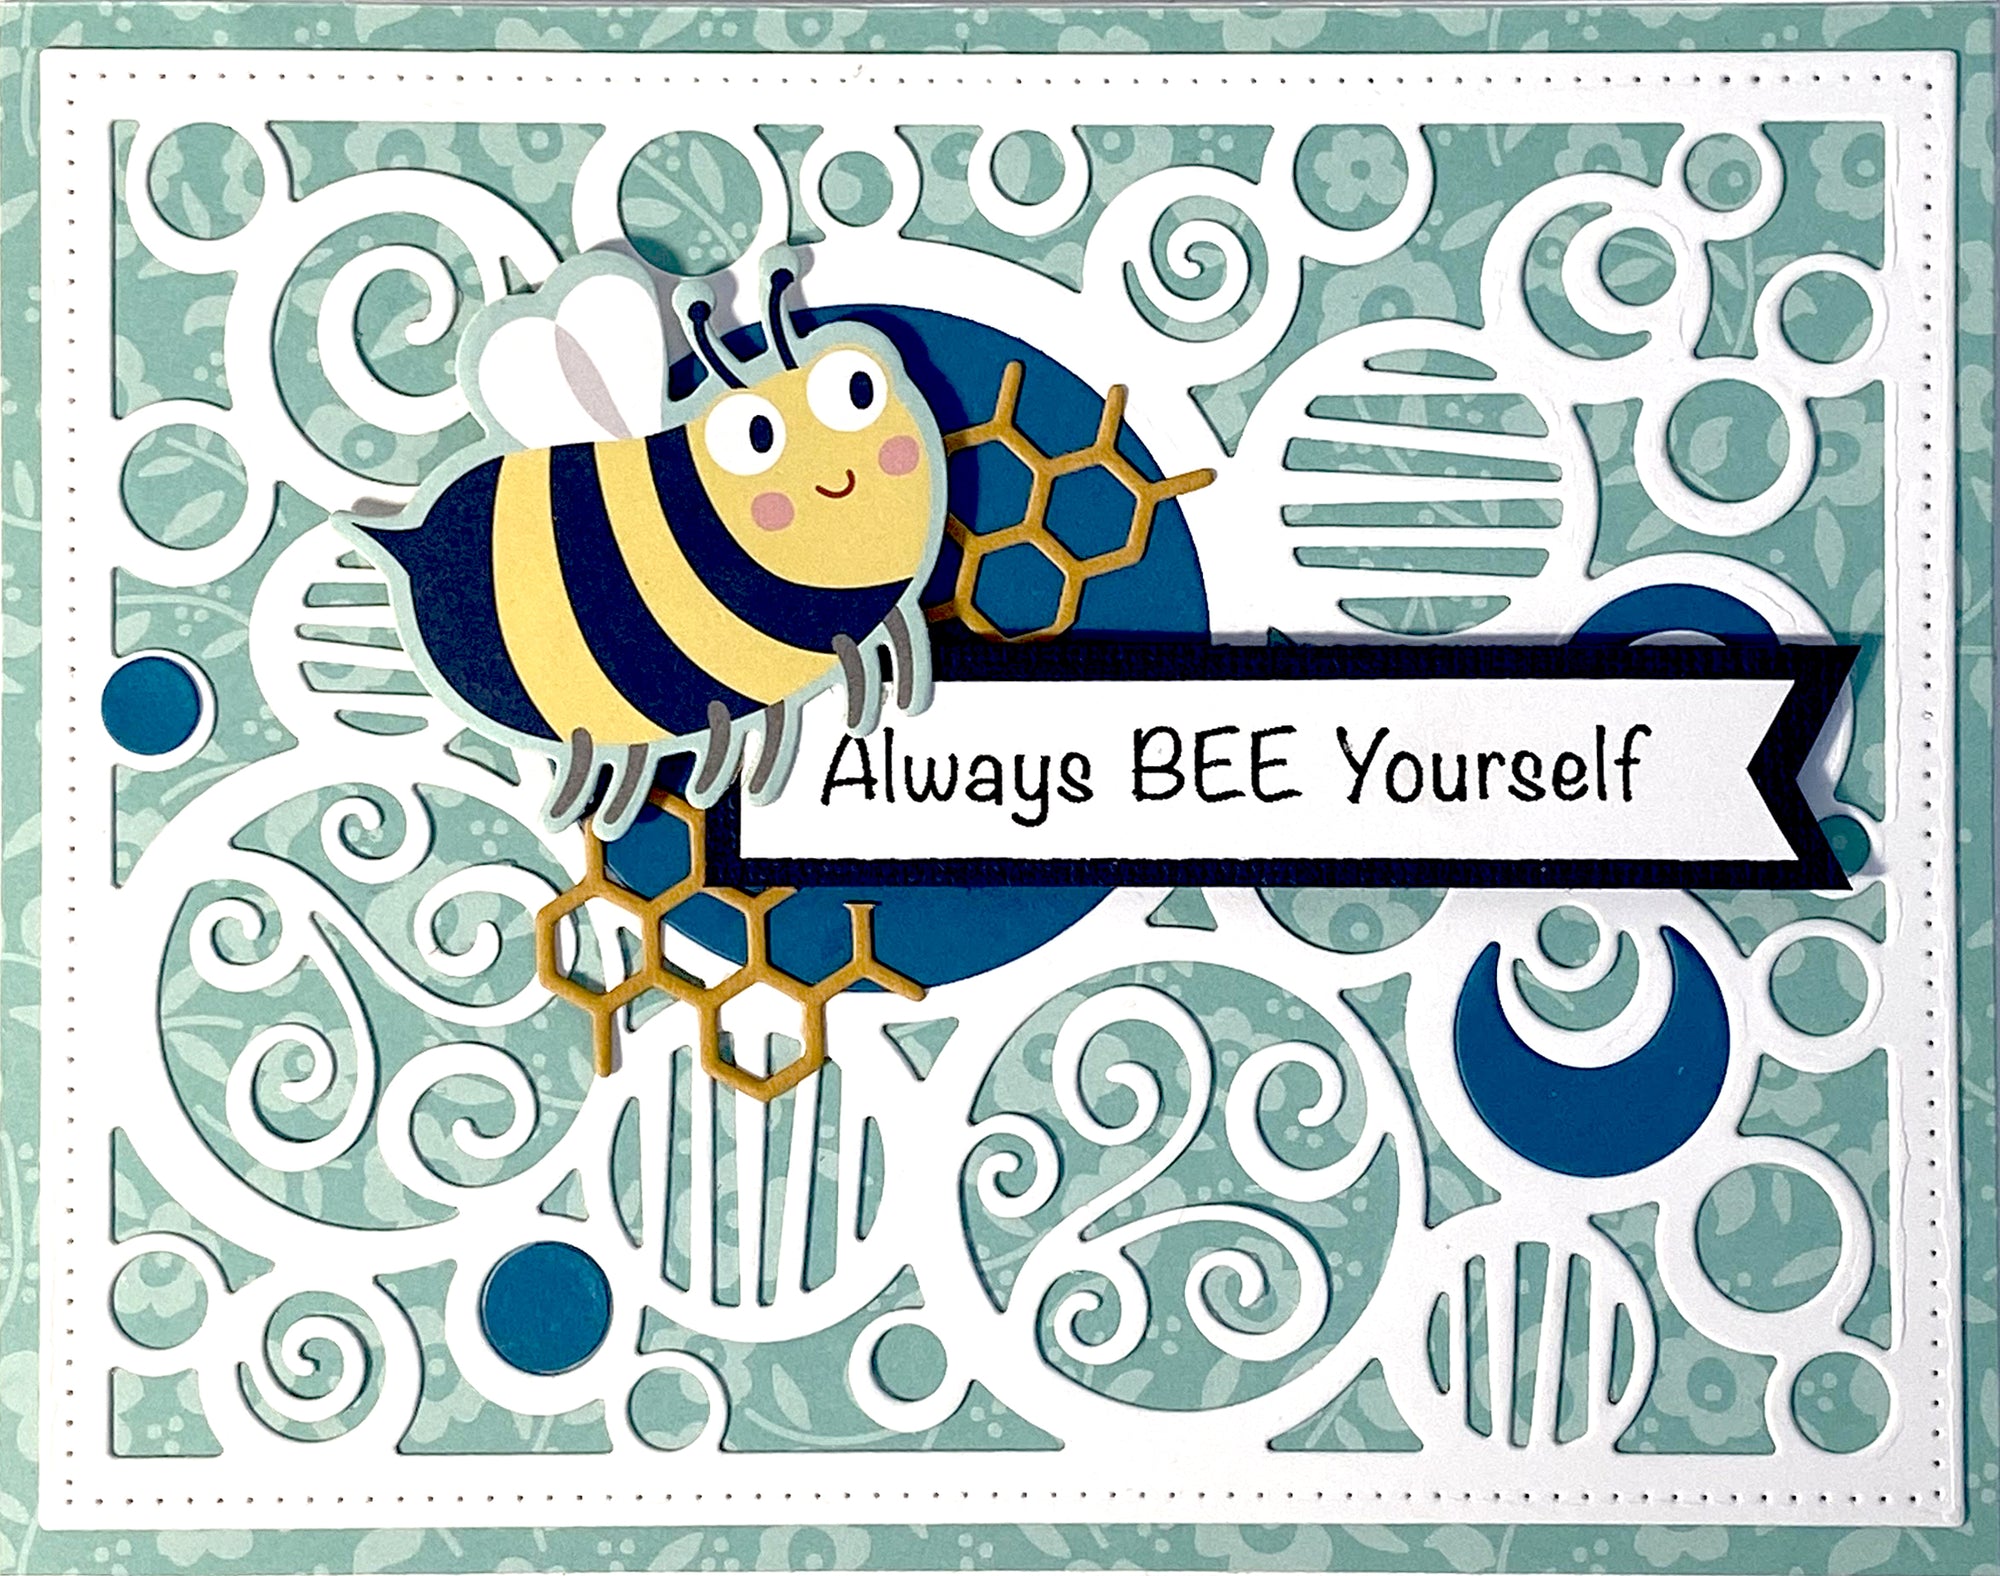 Handmade card using the die, "Circle Background" from Dare 2B Artzy.  Background of the card includes a circular design with a bee and the sentiment, "Always bee yourself".